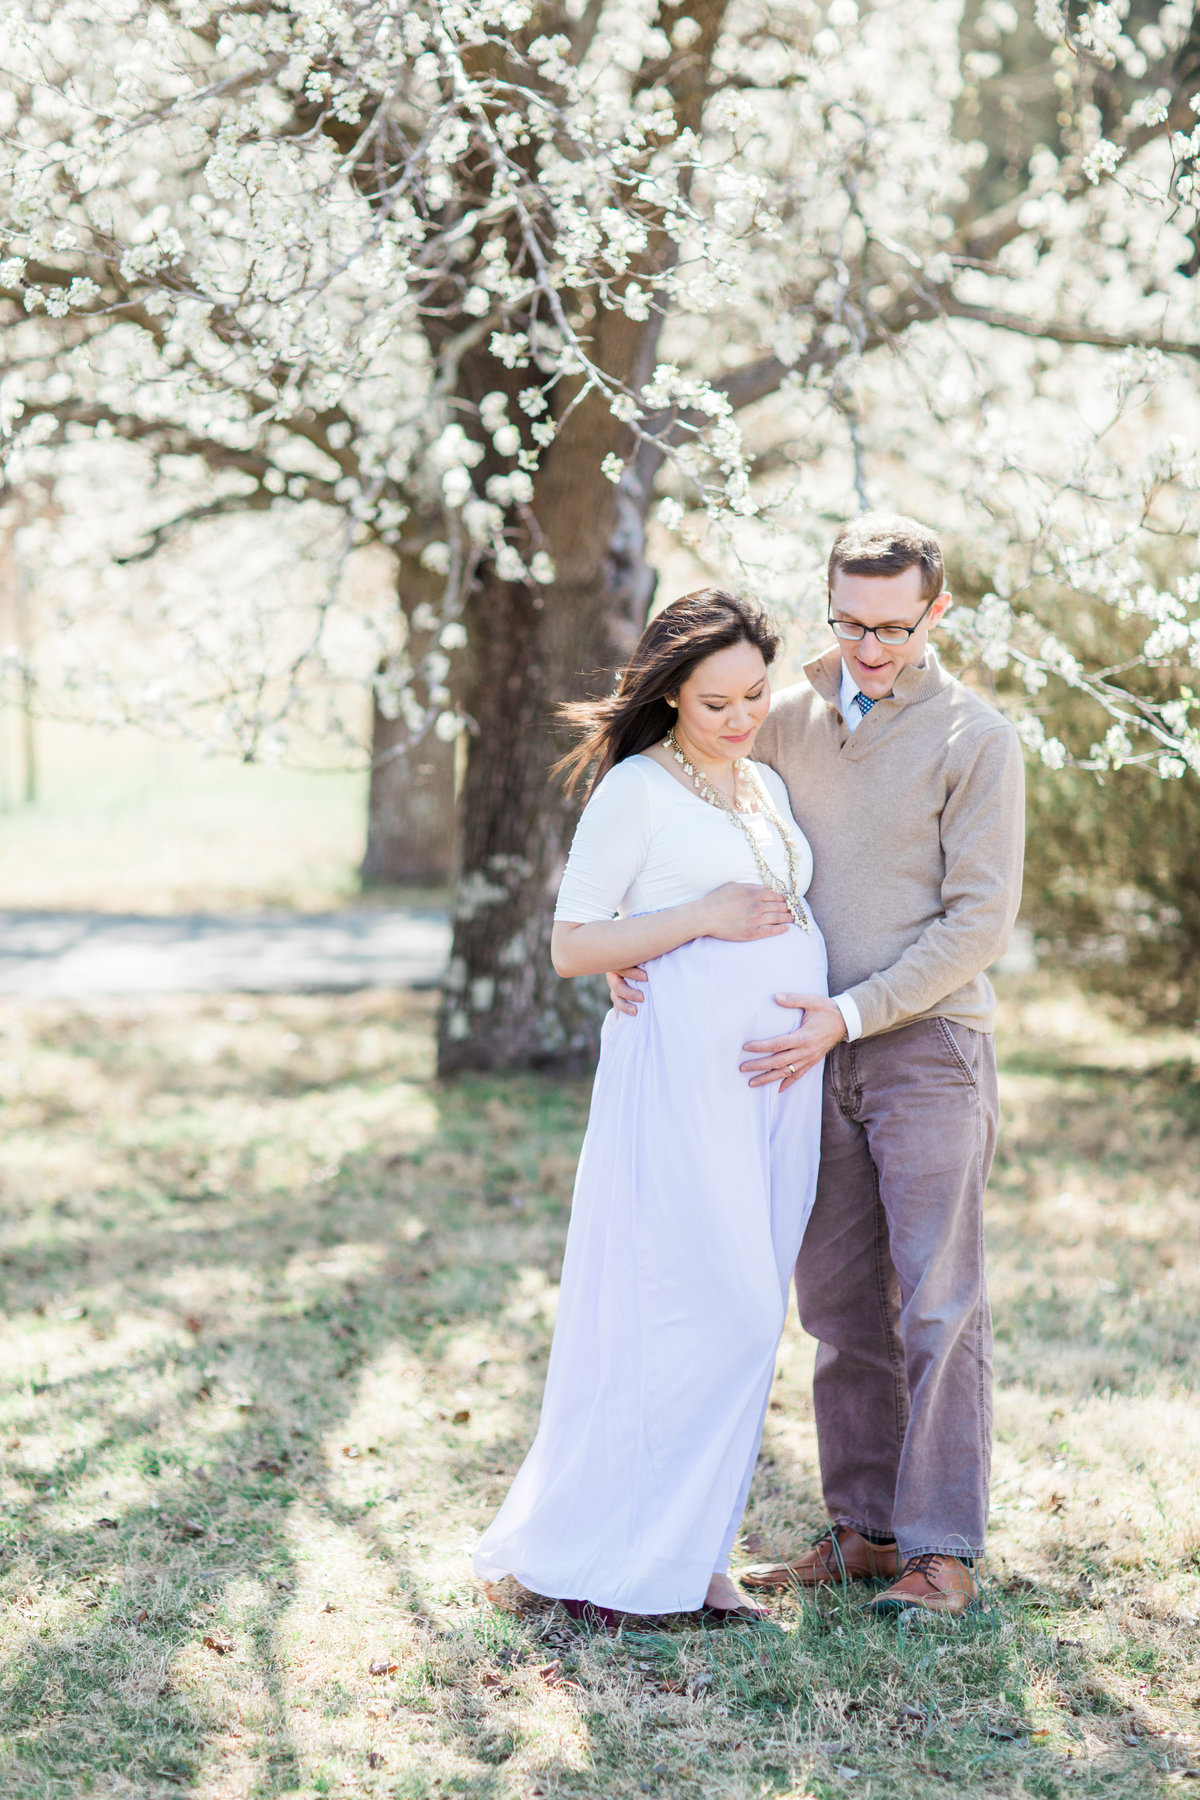 Virginia Maternity Photographer | Chelsea Schaefer Photography | Spring Maternity Session | looking down at baby